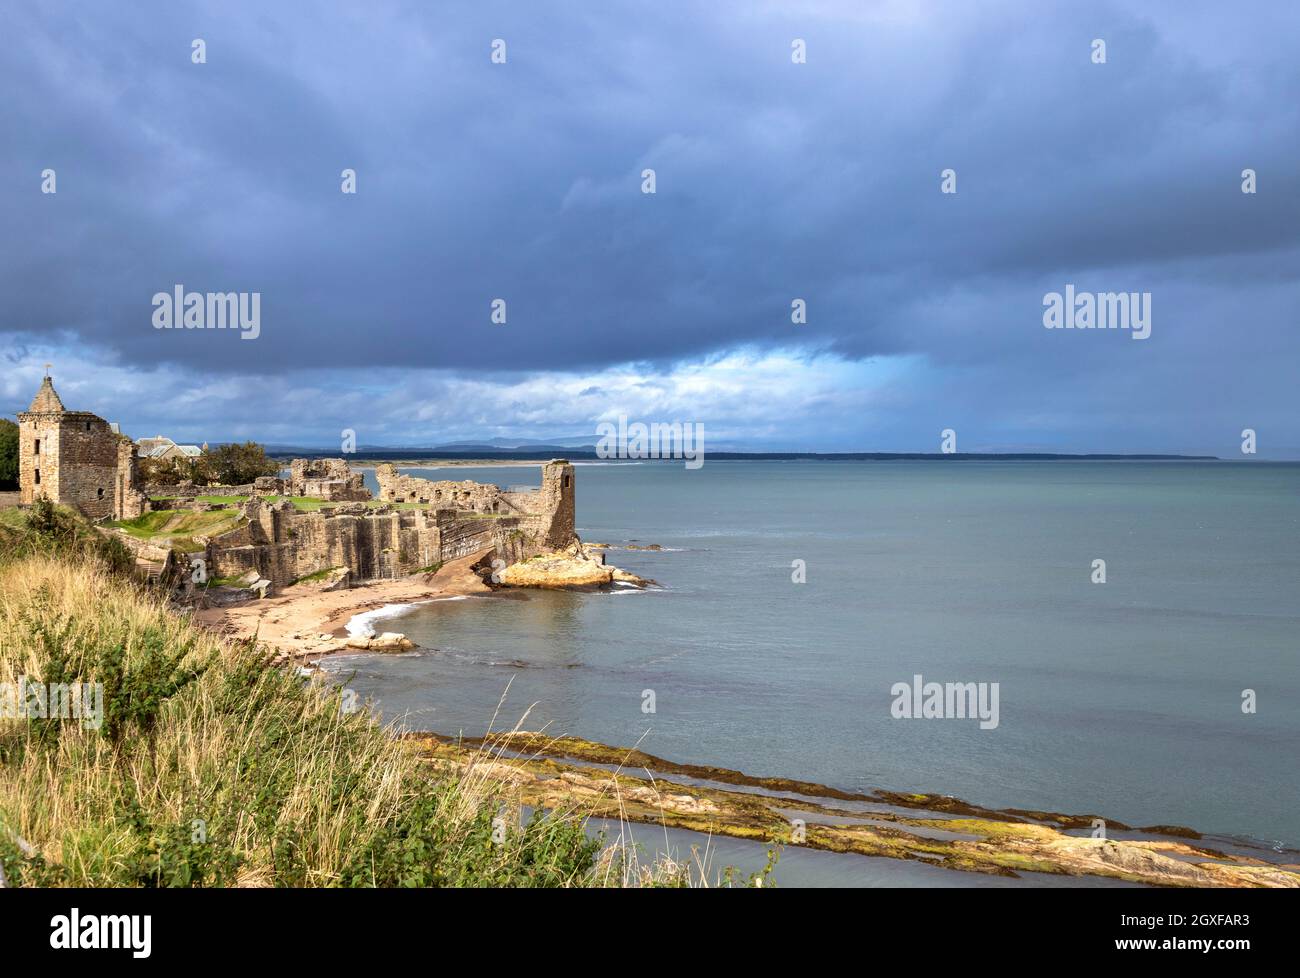 ST ANDREWS FIFE SCOTLAND THE CASTLE RUINS OVERLOOKING THE BAY AND SEA Stock Photo